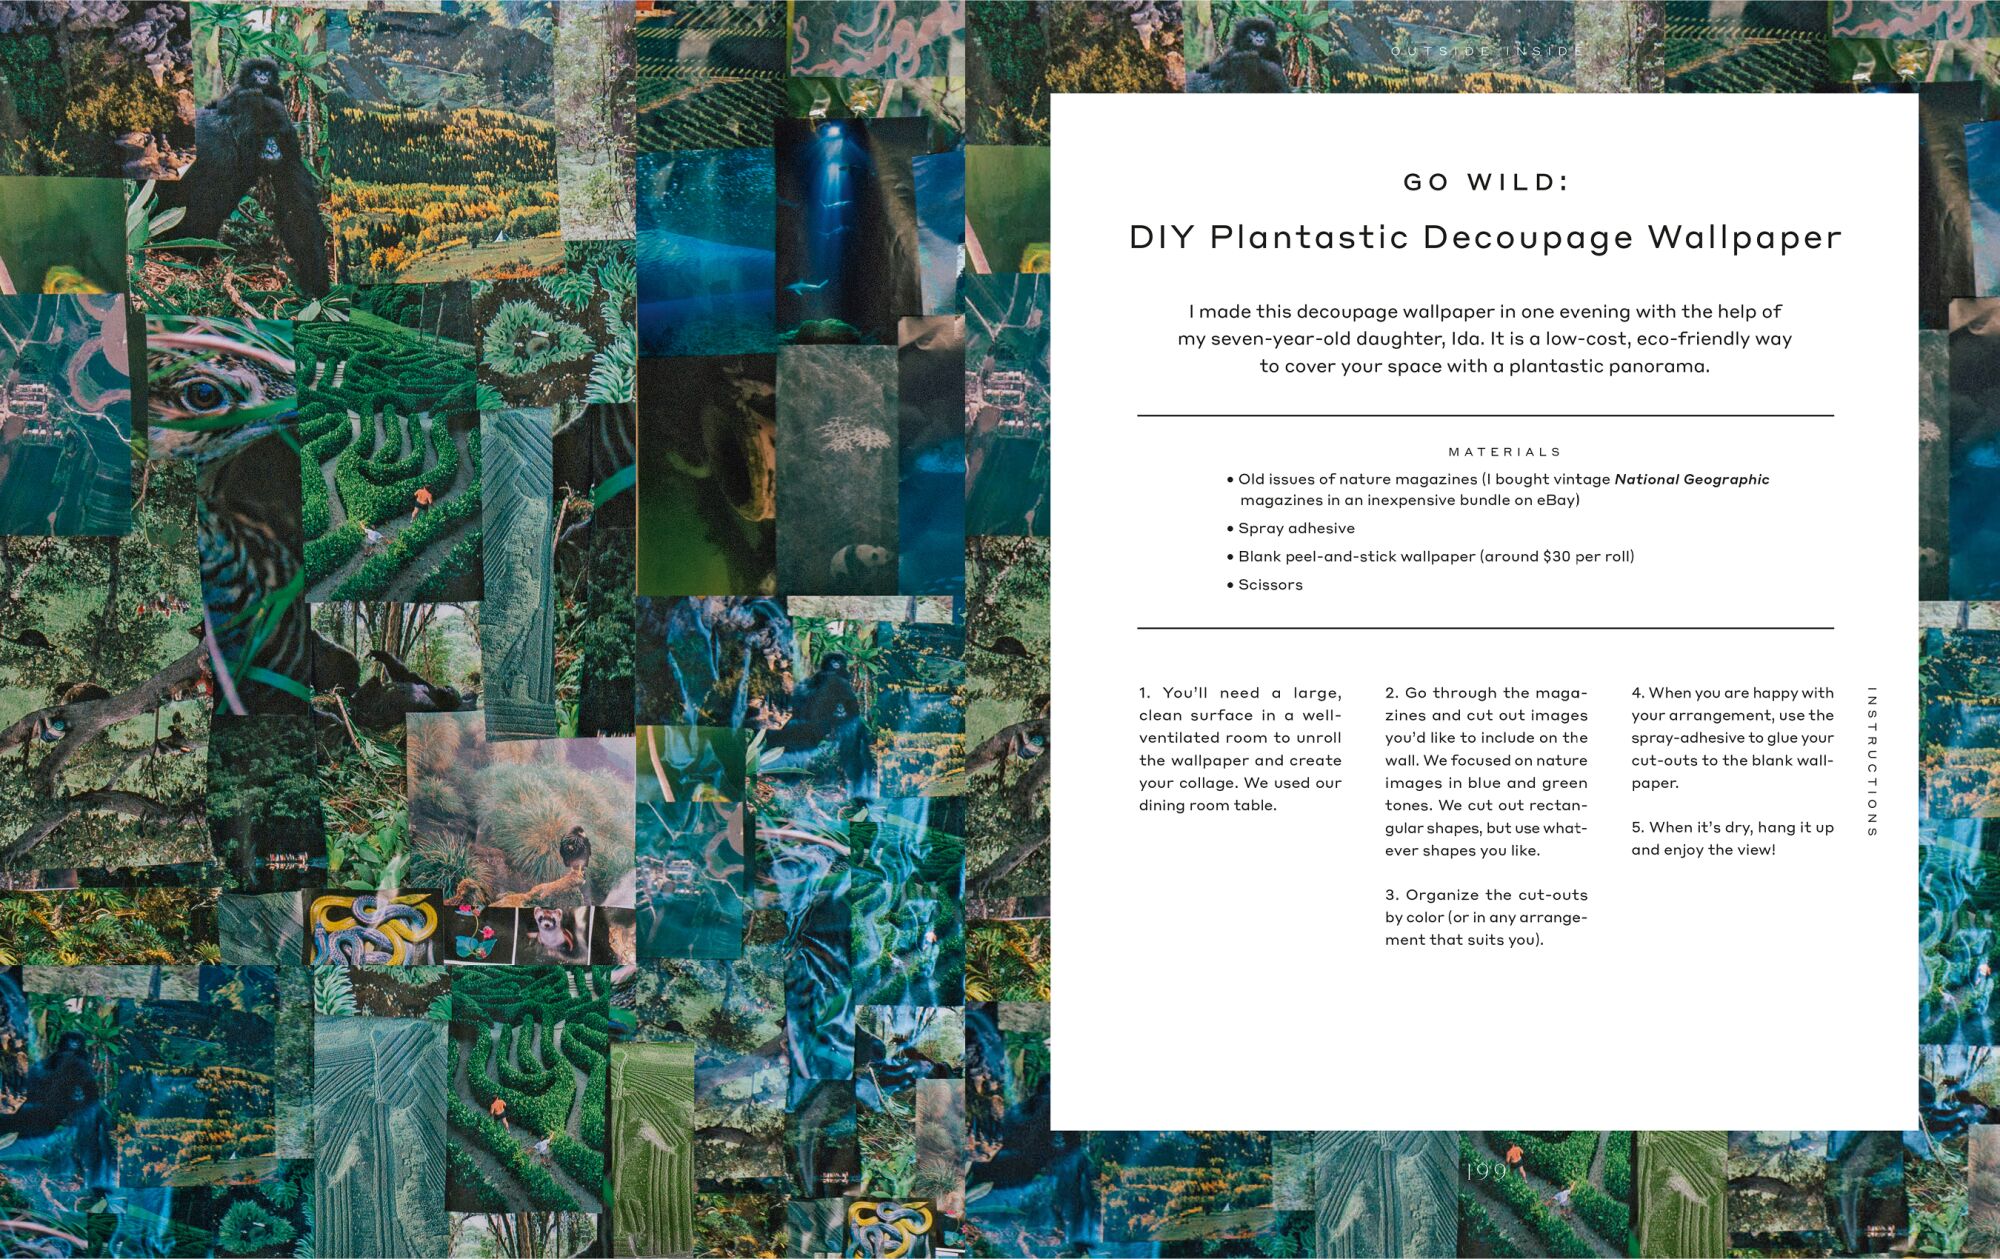 A page from the book "Jungalow: Decorate Wild" discusses making DIY decoupage wallpaper.